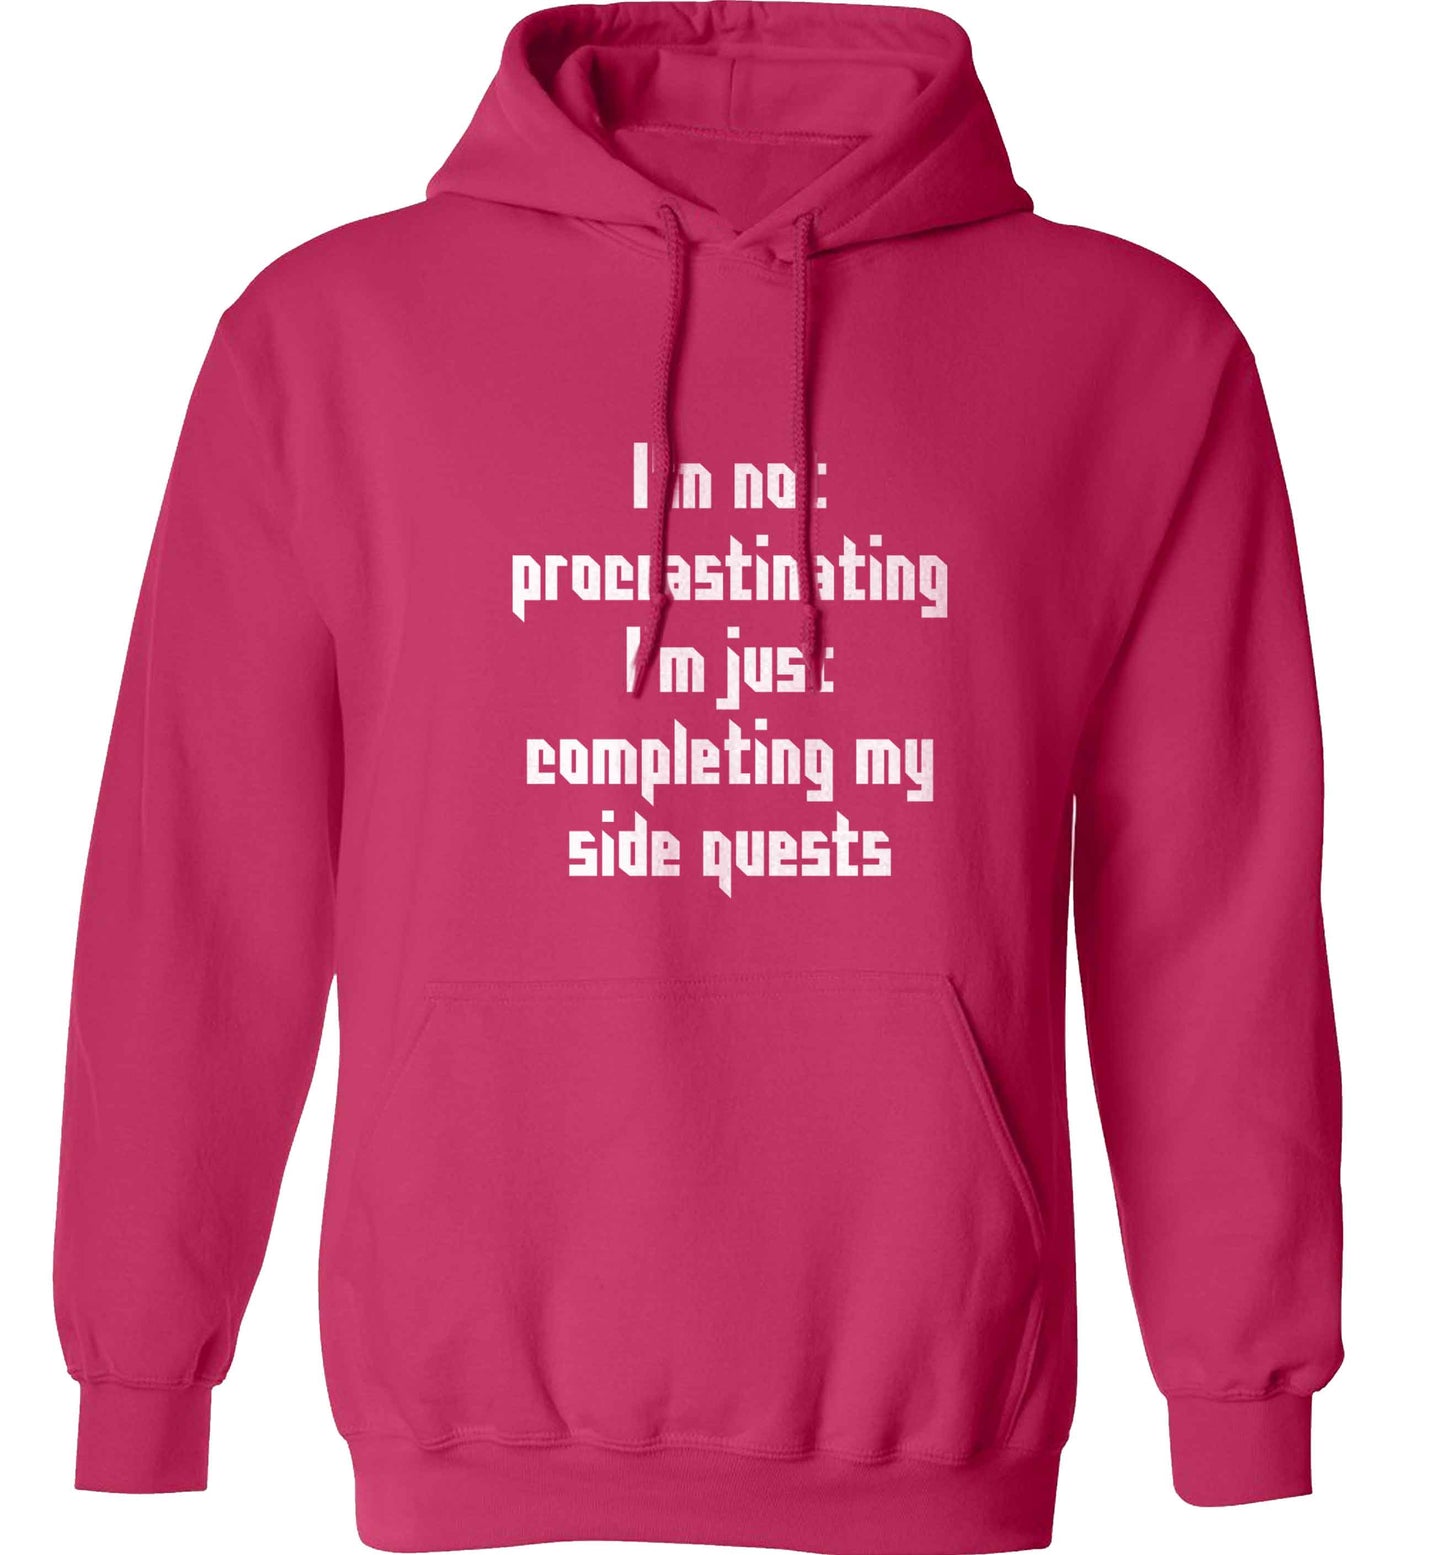 I'm not procrastinating I'm just completing my side quests adults unisex pink hoodie 2XL